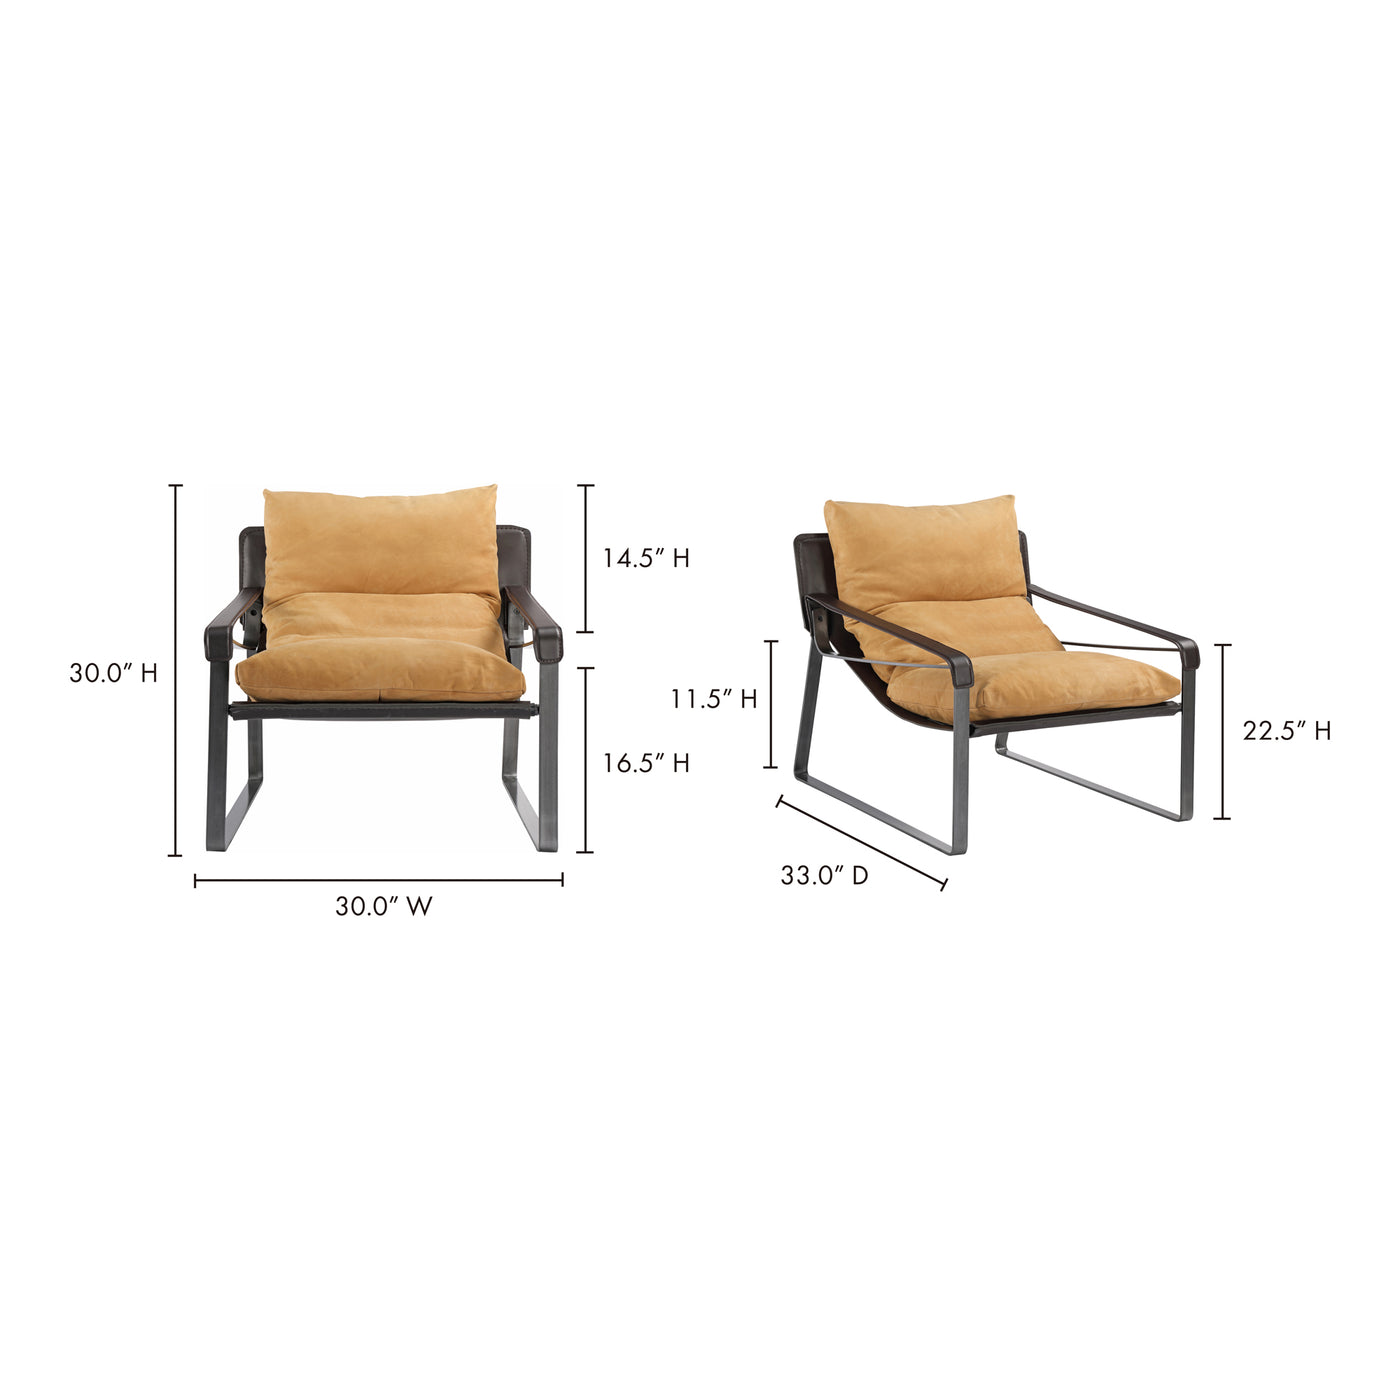 How do you choose the right accent chair for your space? We suggest skipping the rest and head straight for this modern cl...